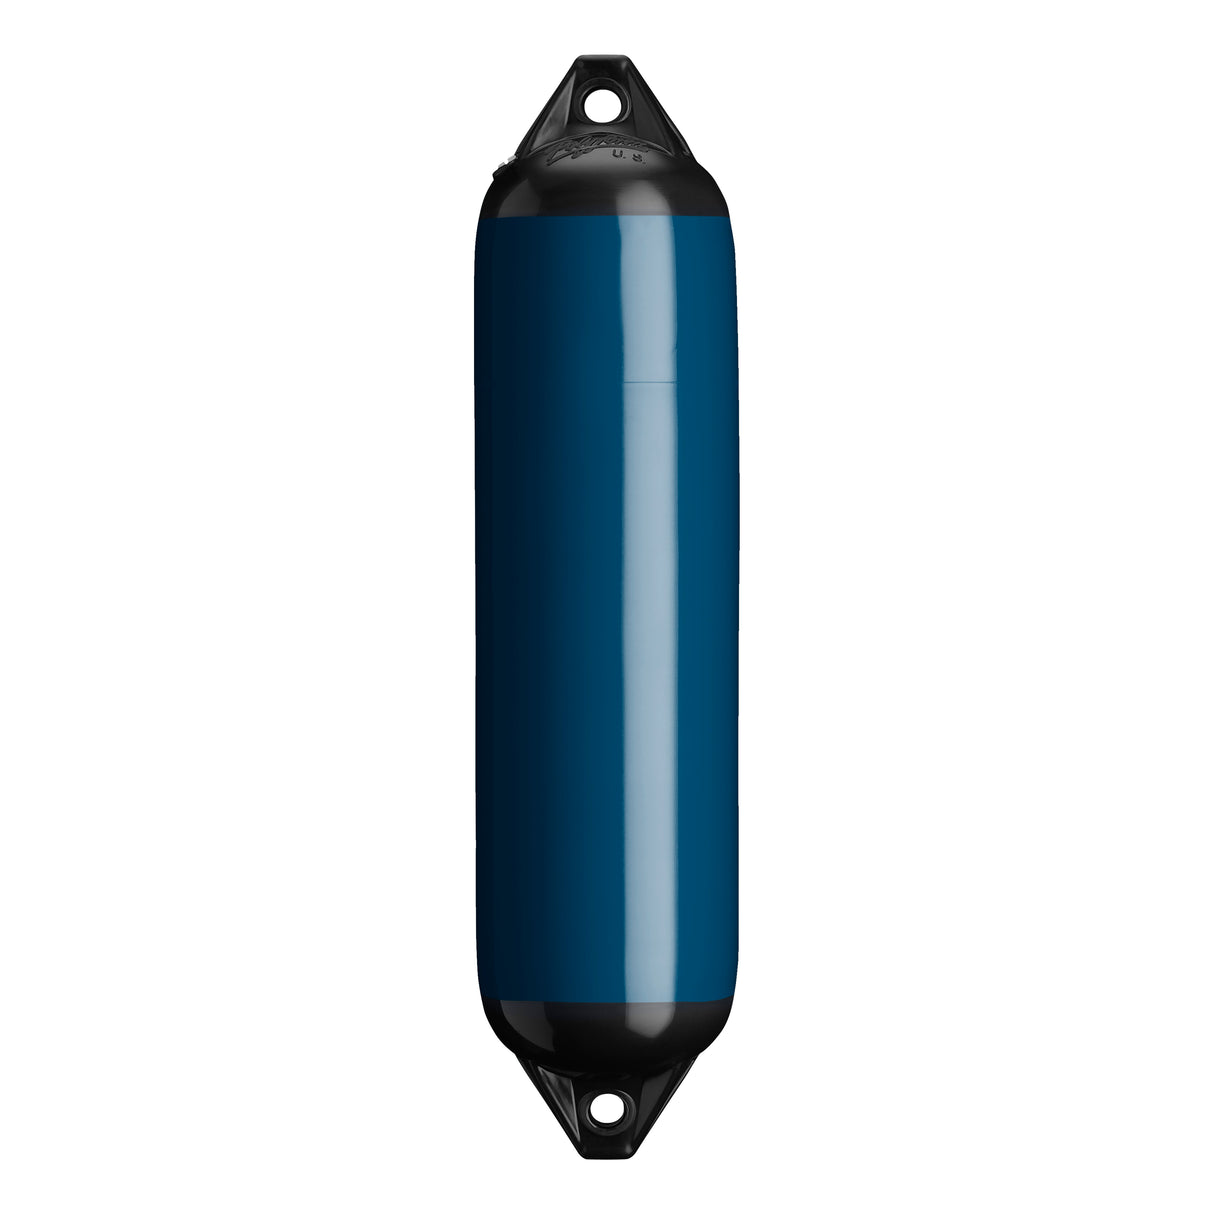 Catalina Blue boat fender with Black-Top, Polyform F-1